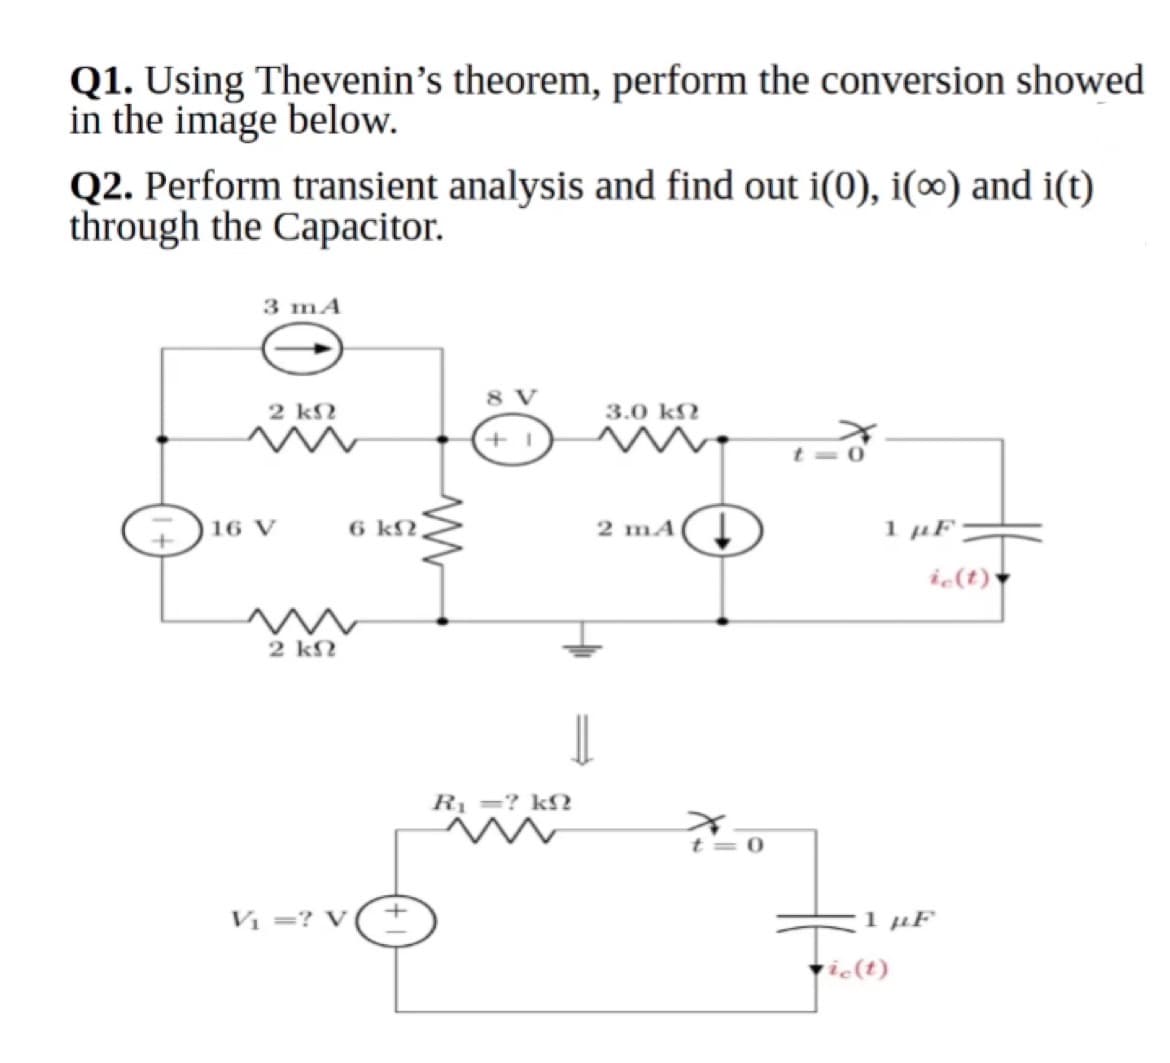 Q1. Using Thevenin's theorem, perform the conversion showed
in the image below.
Q2. Perform transient analysis and find out i(0), i(∞) and i(t)
through the Capacitor.
3 mA
8 V
2 k2
3.0 k?
16 V
6 kN,
2 mA( Į
1 µF
ic(t)*
2 kN
Rị =? kN
t= 0
Vi =? V
1 µF
tie(t)
